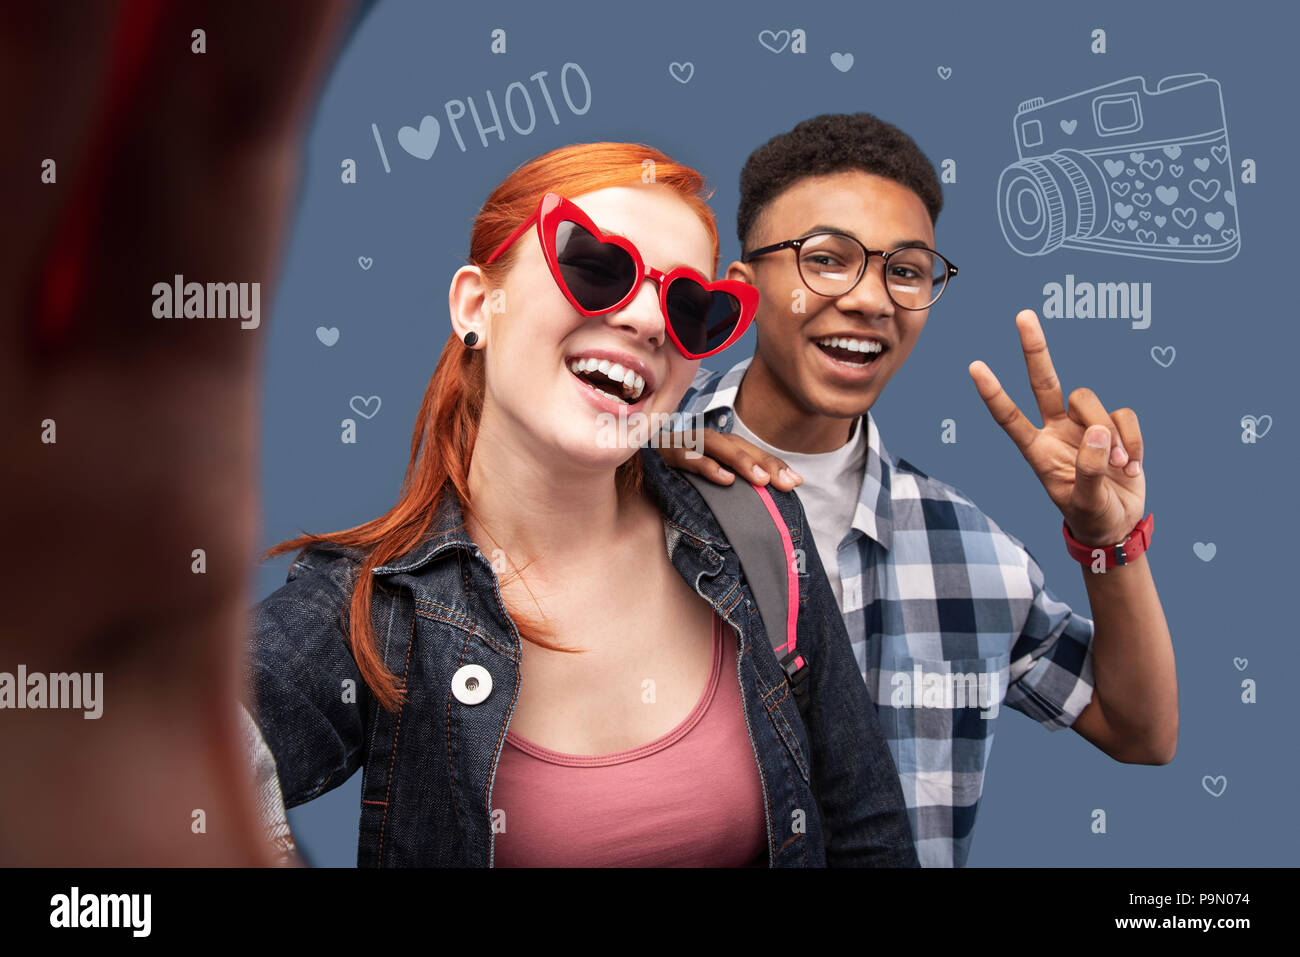 Happy teenager making a peace sign while taking a selfie with his friend Stock Photo